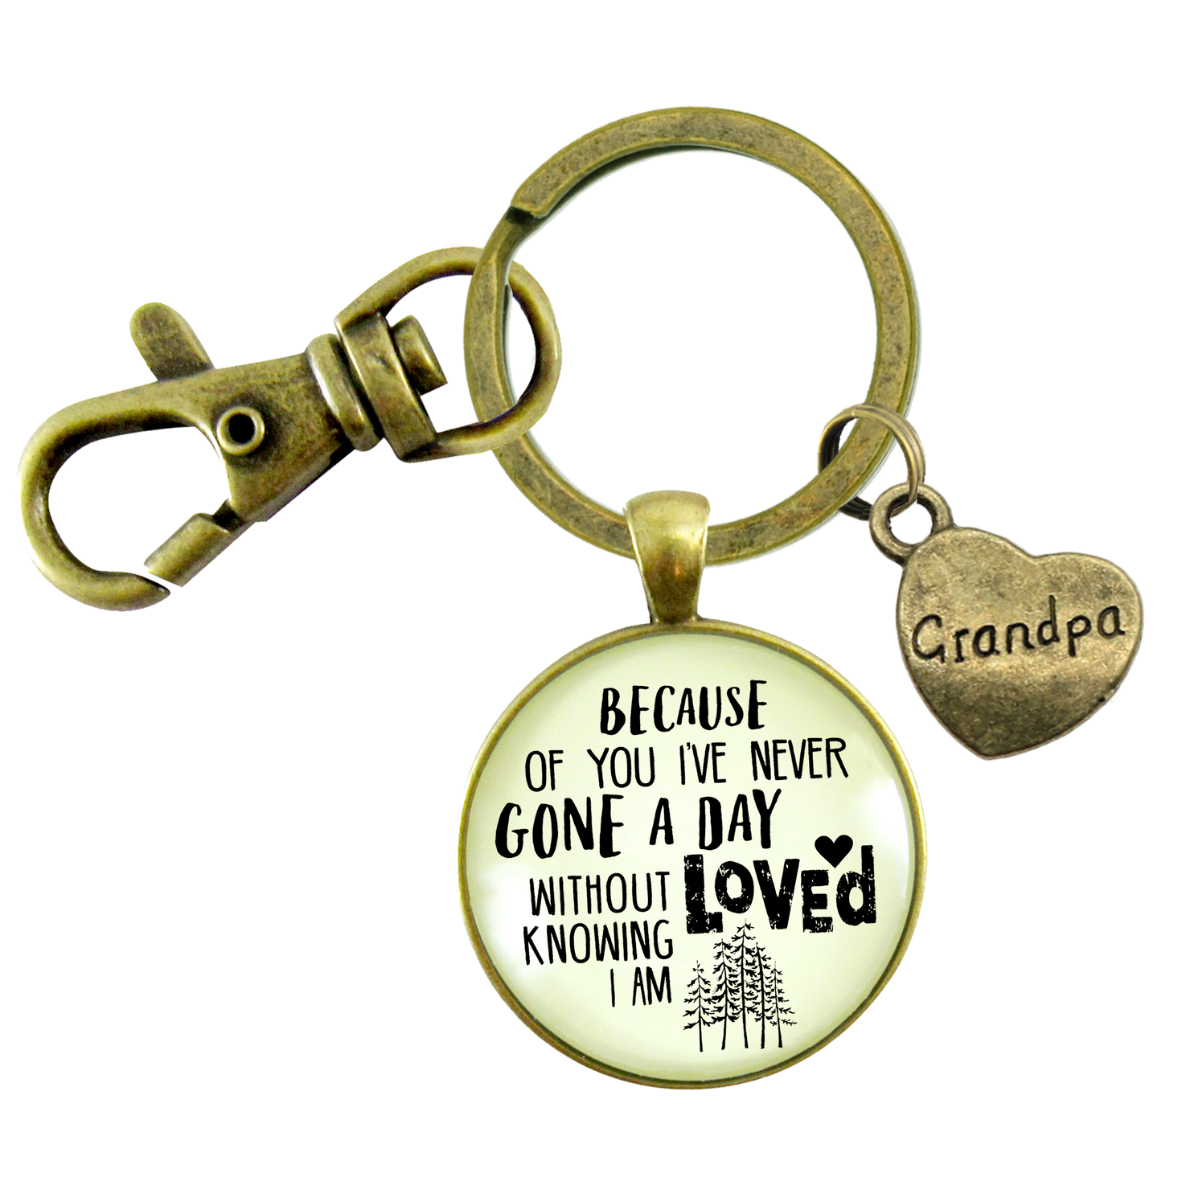 Grandpa Keychain Because of You Never Gone Without Knowing Love Vintage Key Ring Gift - Gutsy Goodness Handmade Jewelry;Grandpa Keychain Because Of You Never Gone Without Knowing Love Vintage Key Ring Gift - Gutsy Goodness Handmade Jewelry Gifts